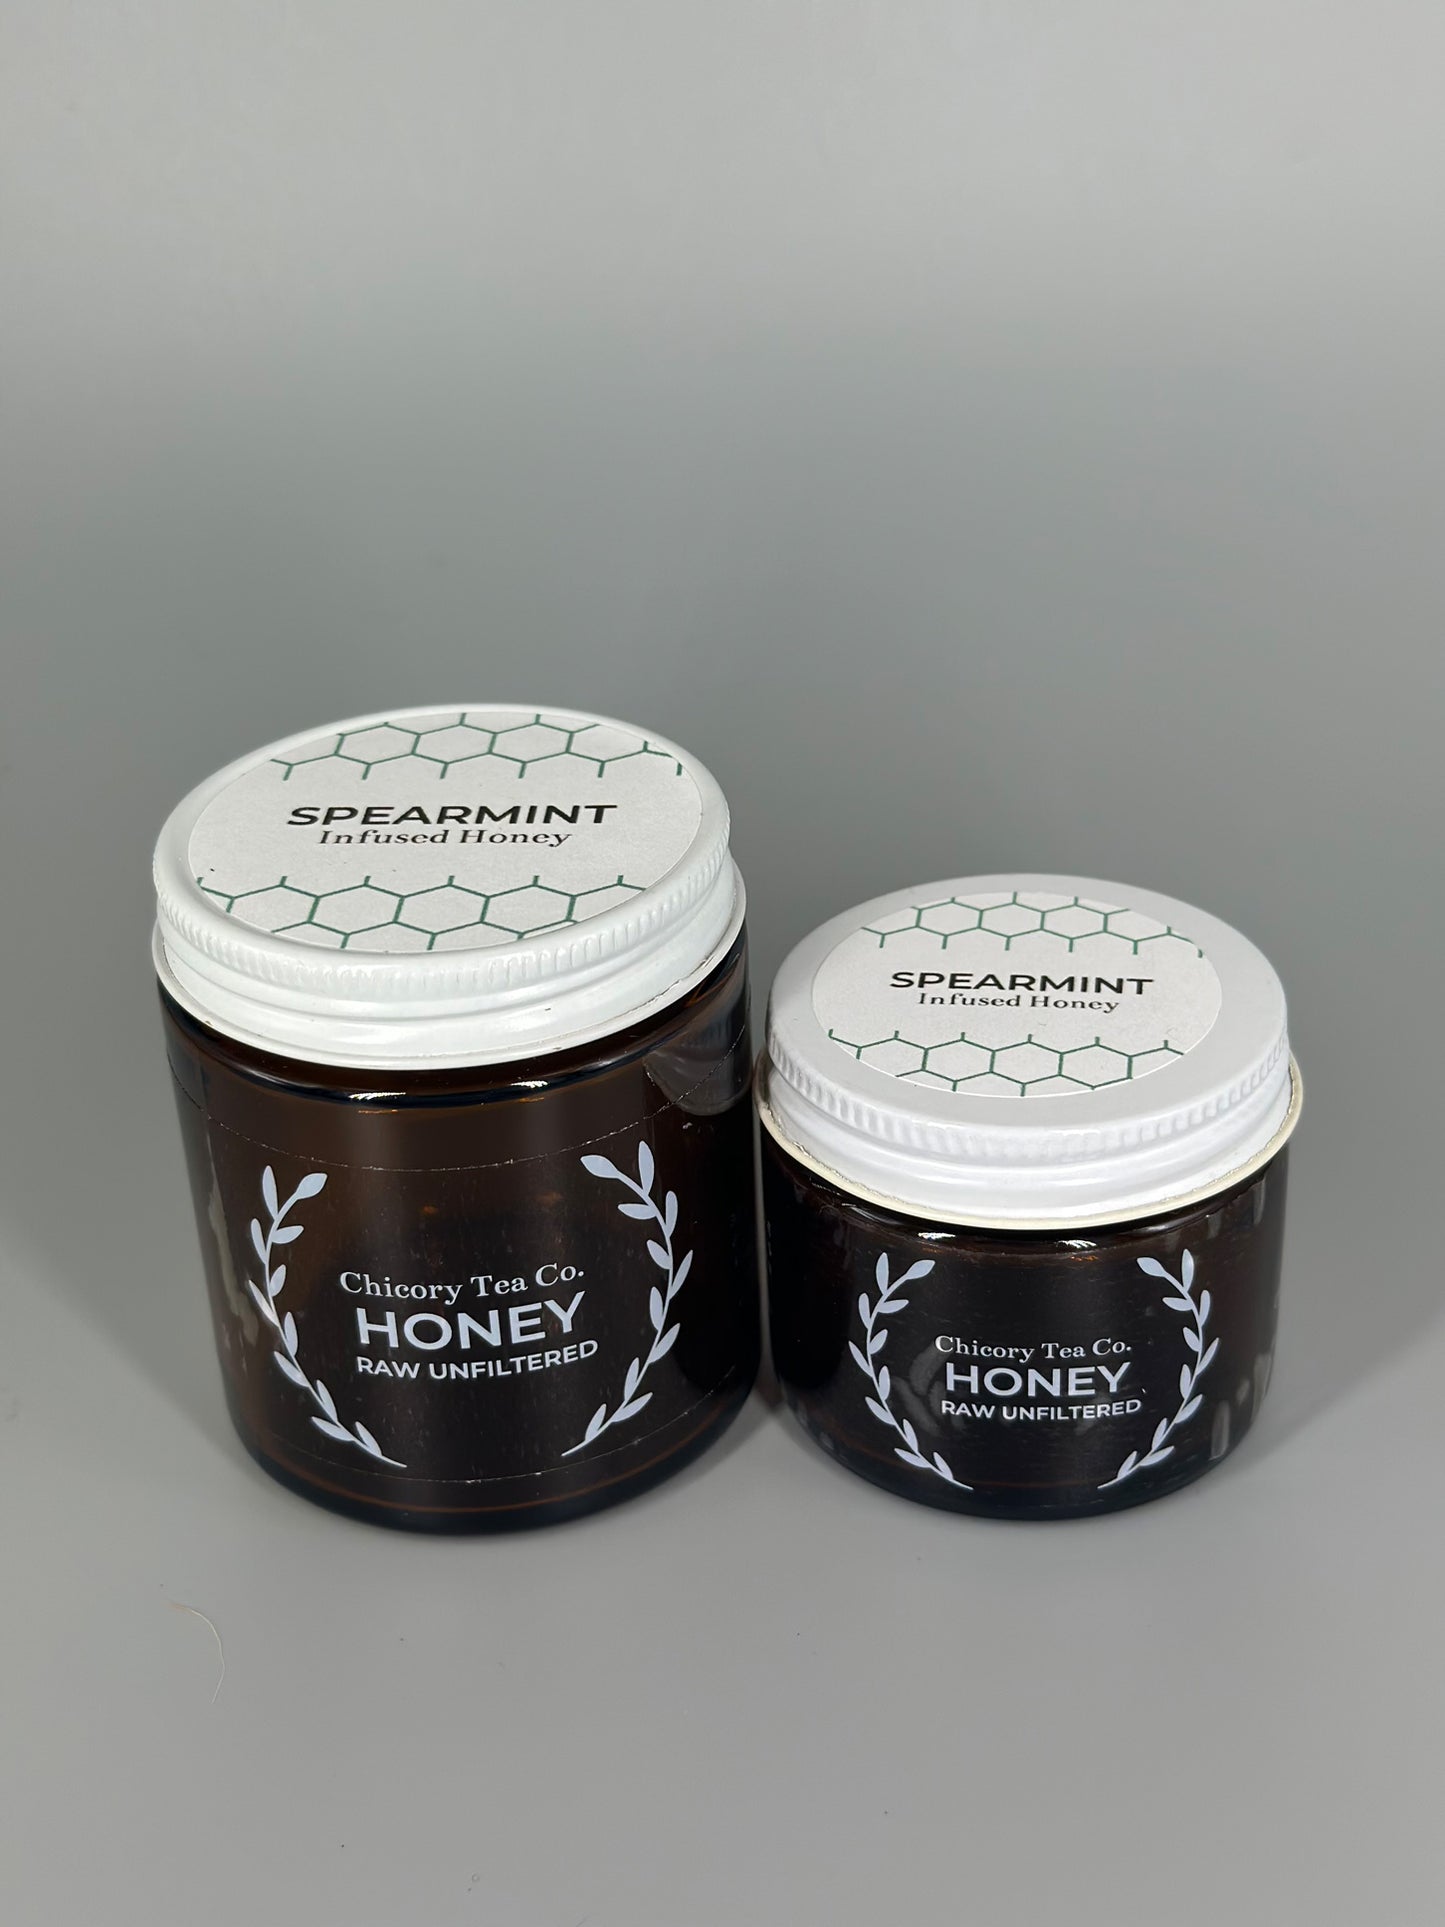 Chicory Tea Co.'s Spearmint Honey in small and large jar, view from front